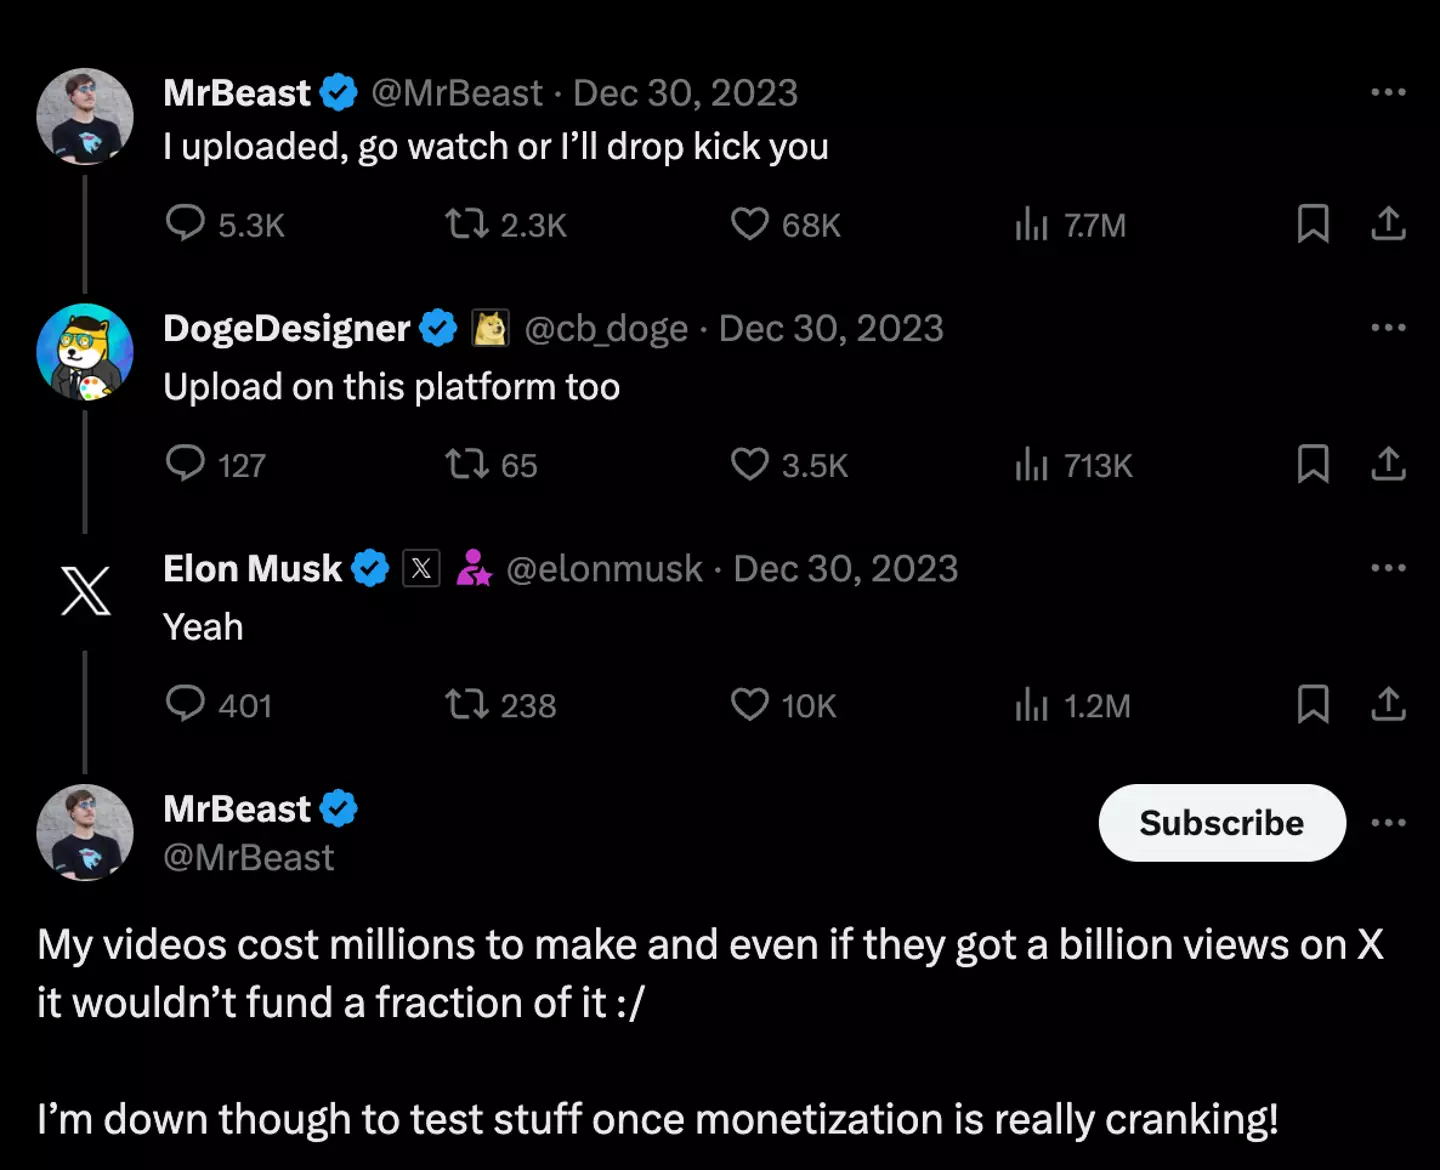 People have urged MrBeast to share his content on X.